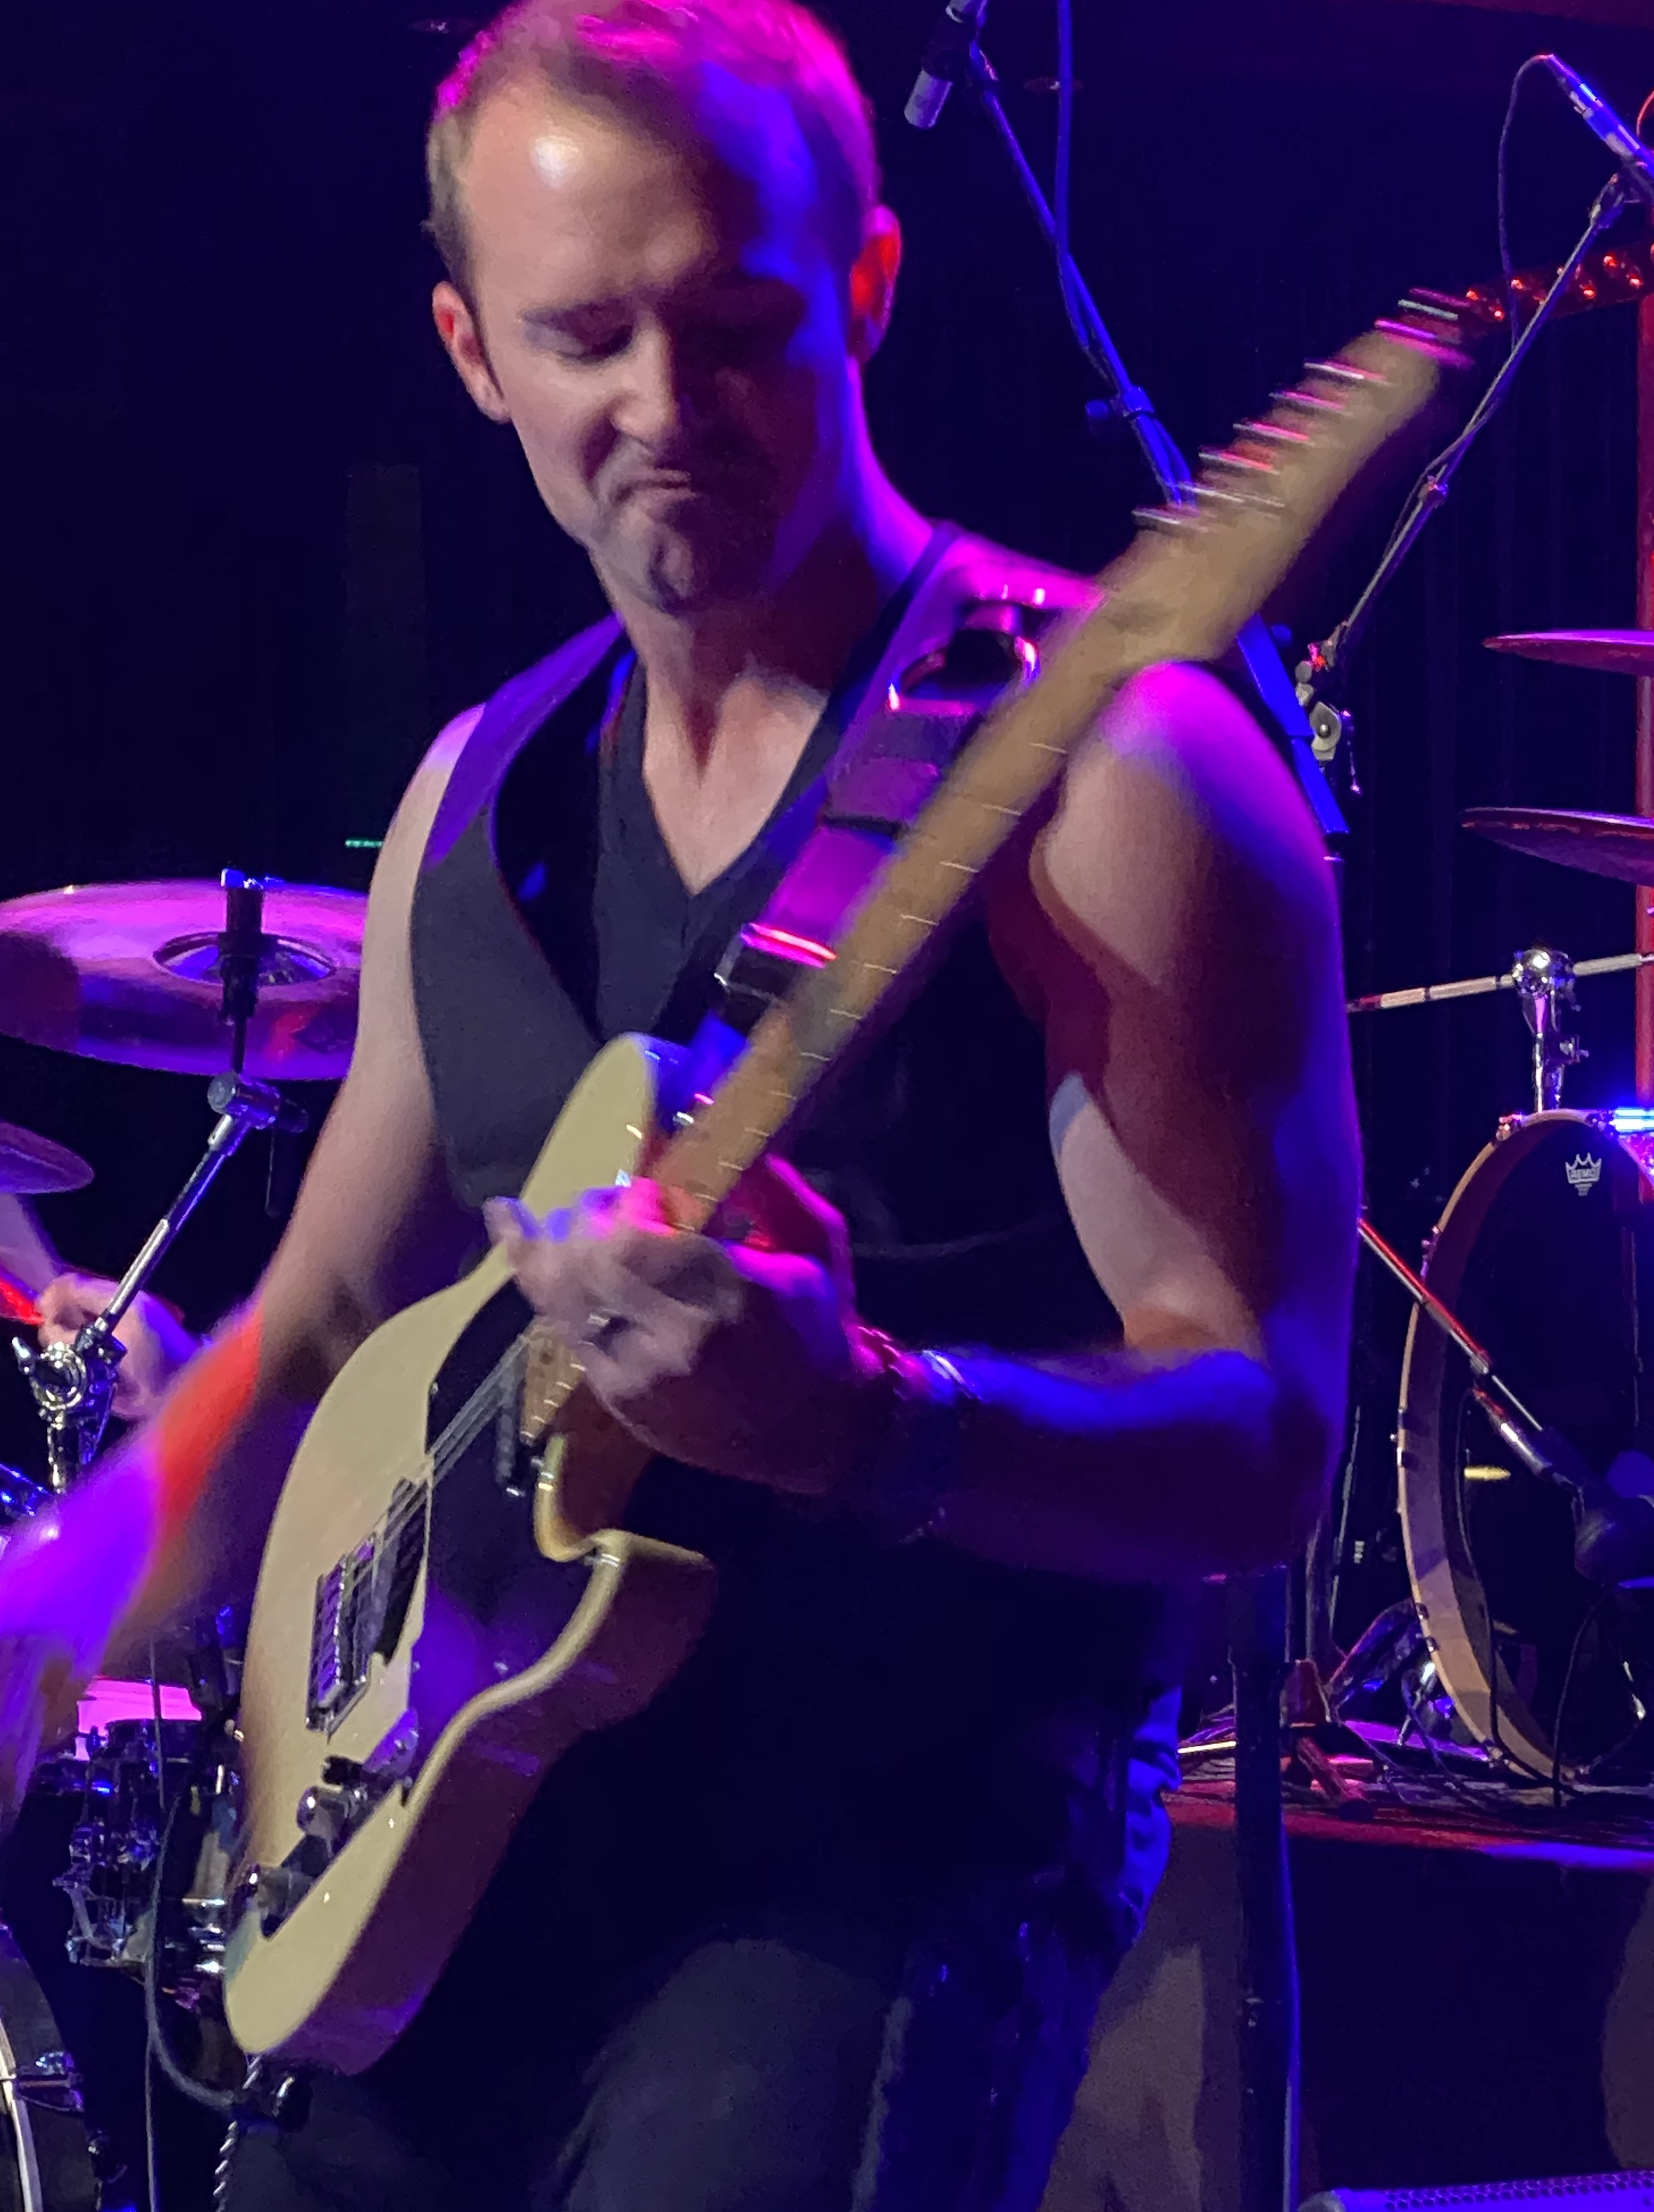 Aaron Kusterer live at The canyon in Agoura Hills, CA  (1-26-19)   photo by Gina Spiropoulos